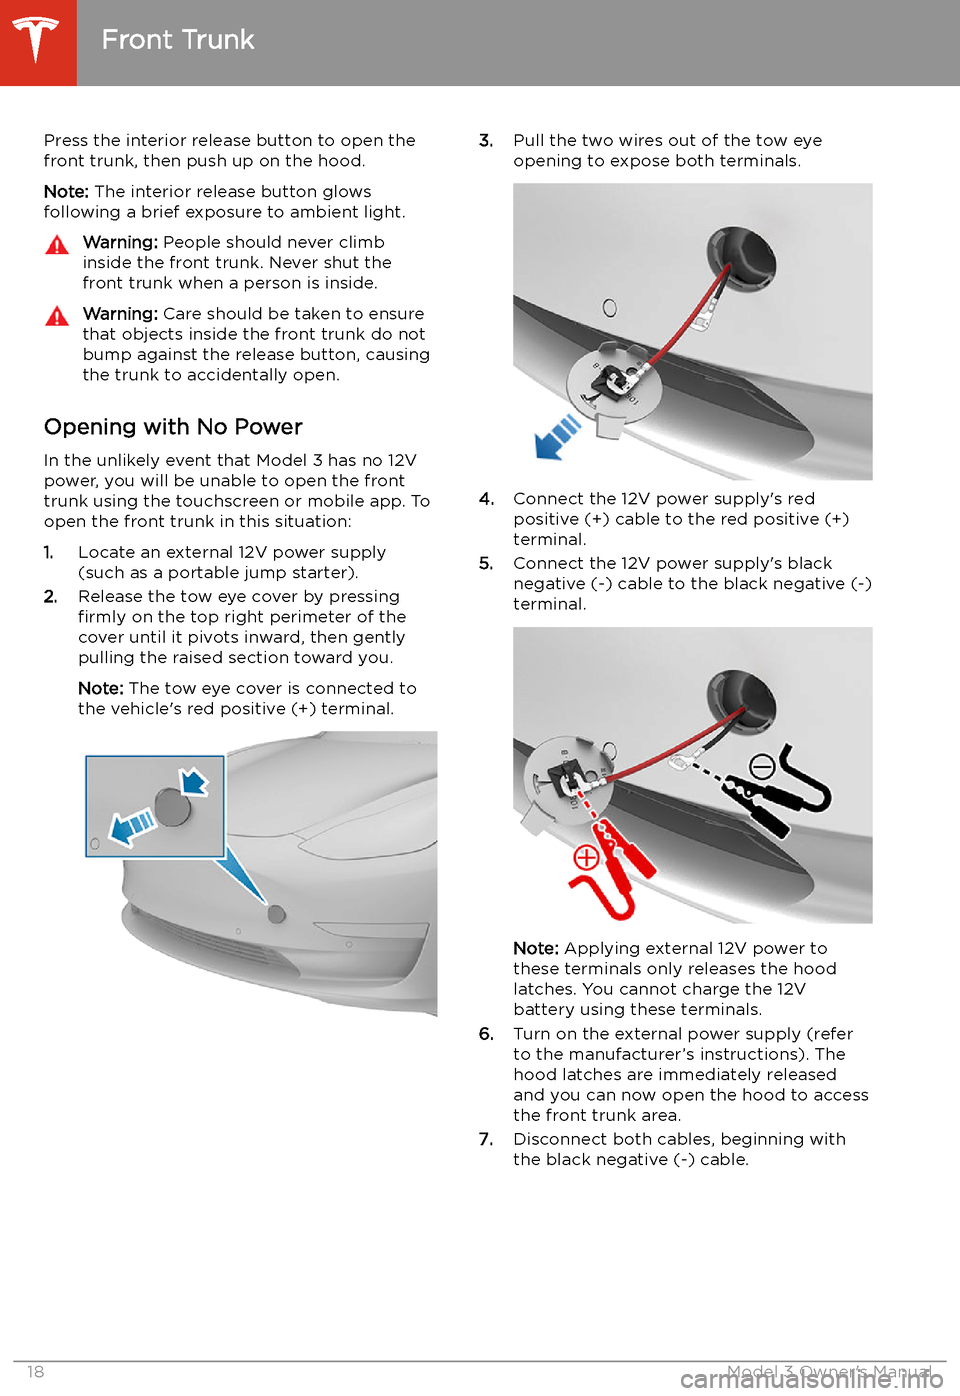 TESLA MODEL 3 2019  Owners Manual (Europe) Press the interior release button to open the
front trunk, then push up on the hood.
Note:  The interior release button glows
following a brief exposure to ambient light.Warning:  People should never 